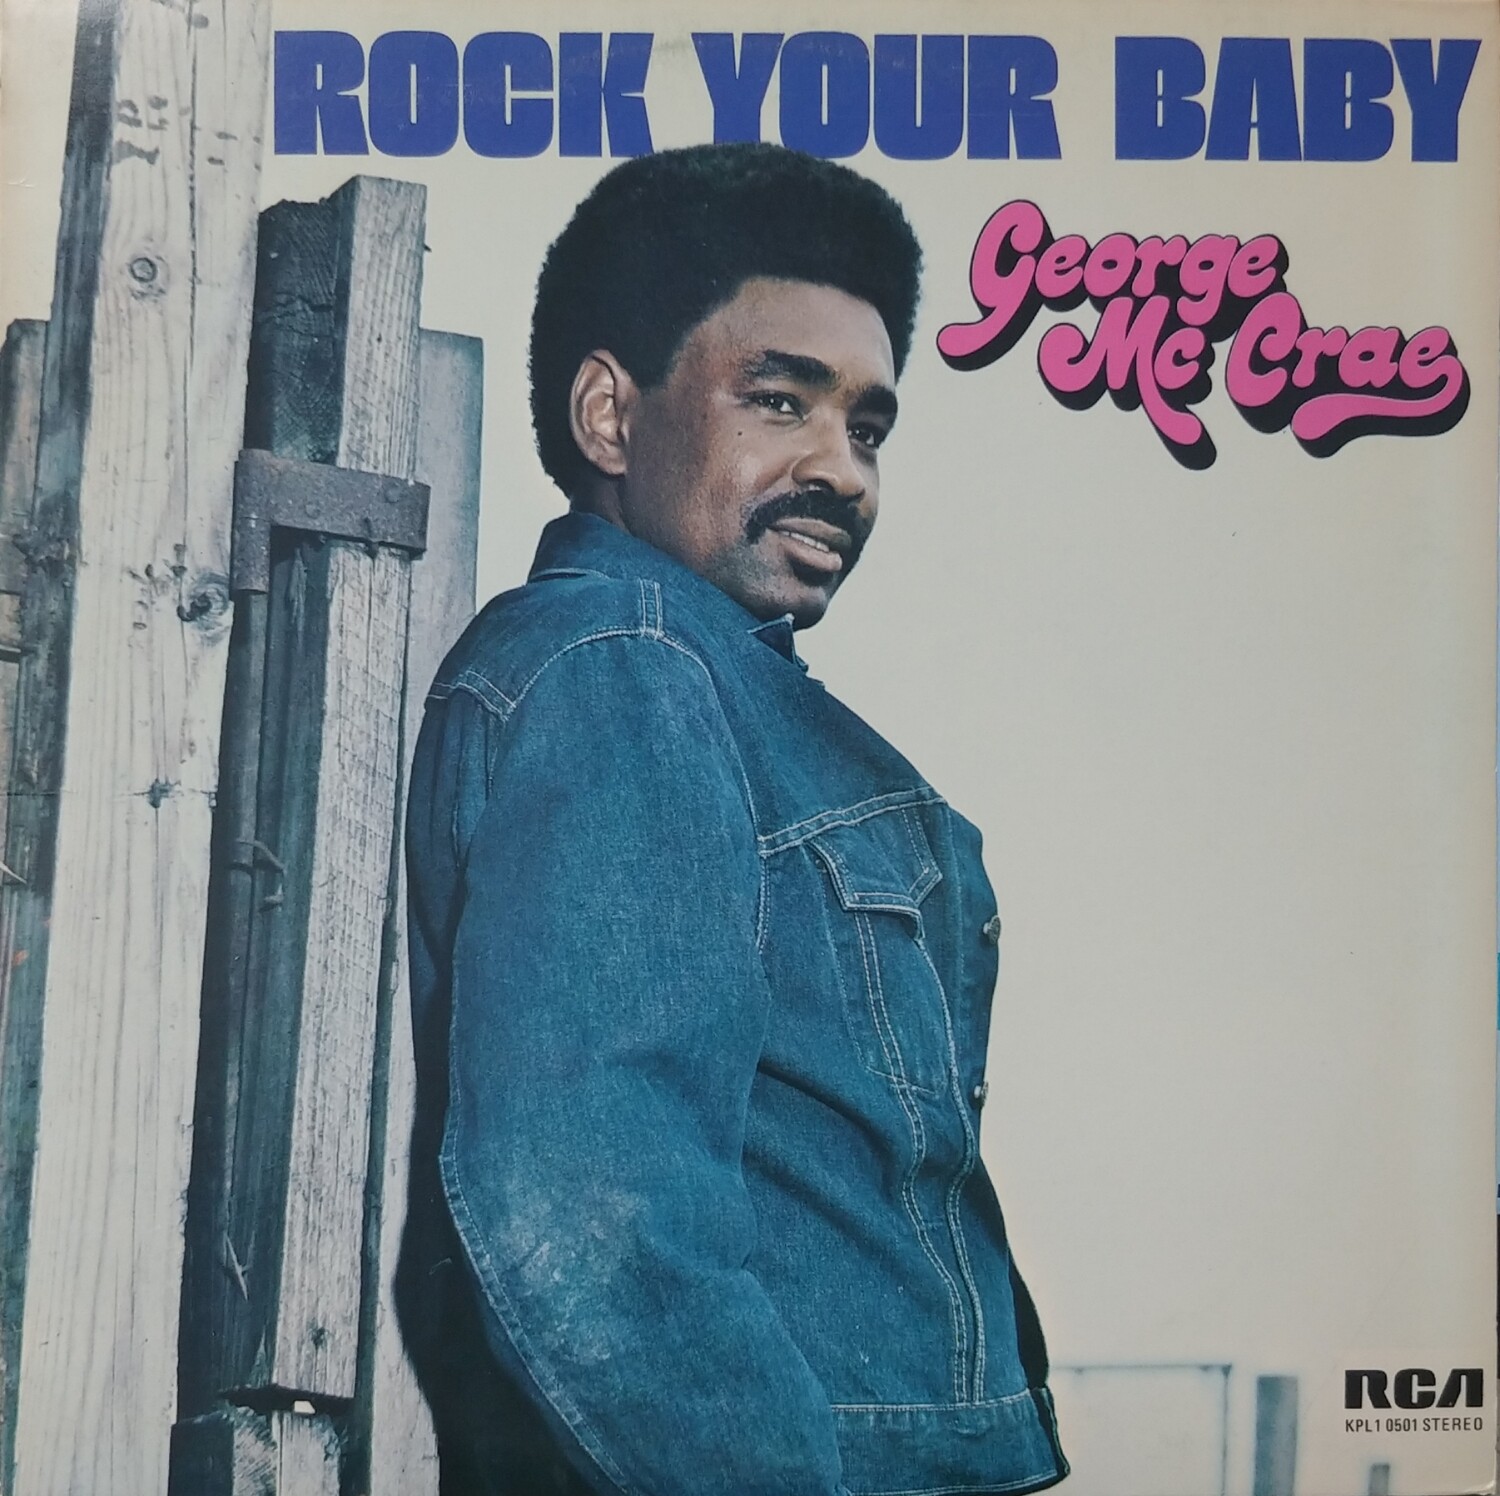 George McCrae - Rock your baby